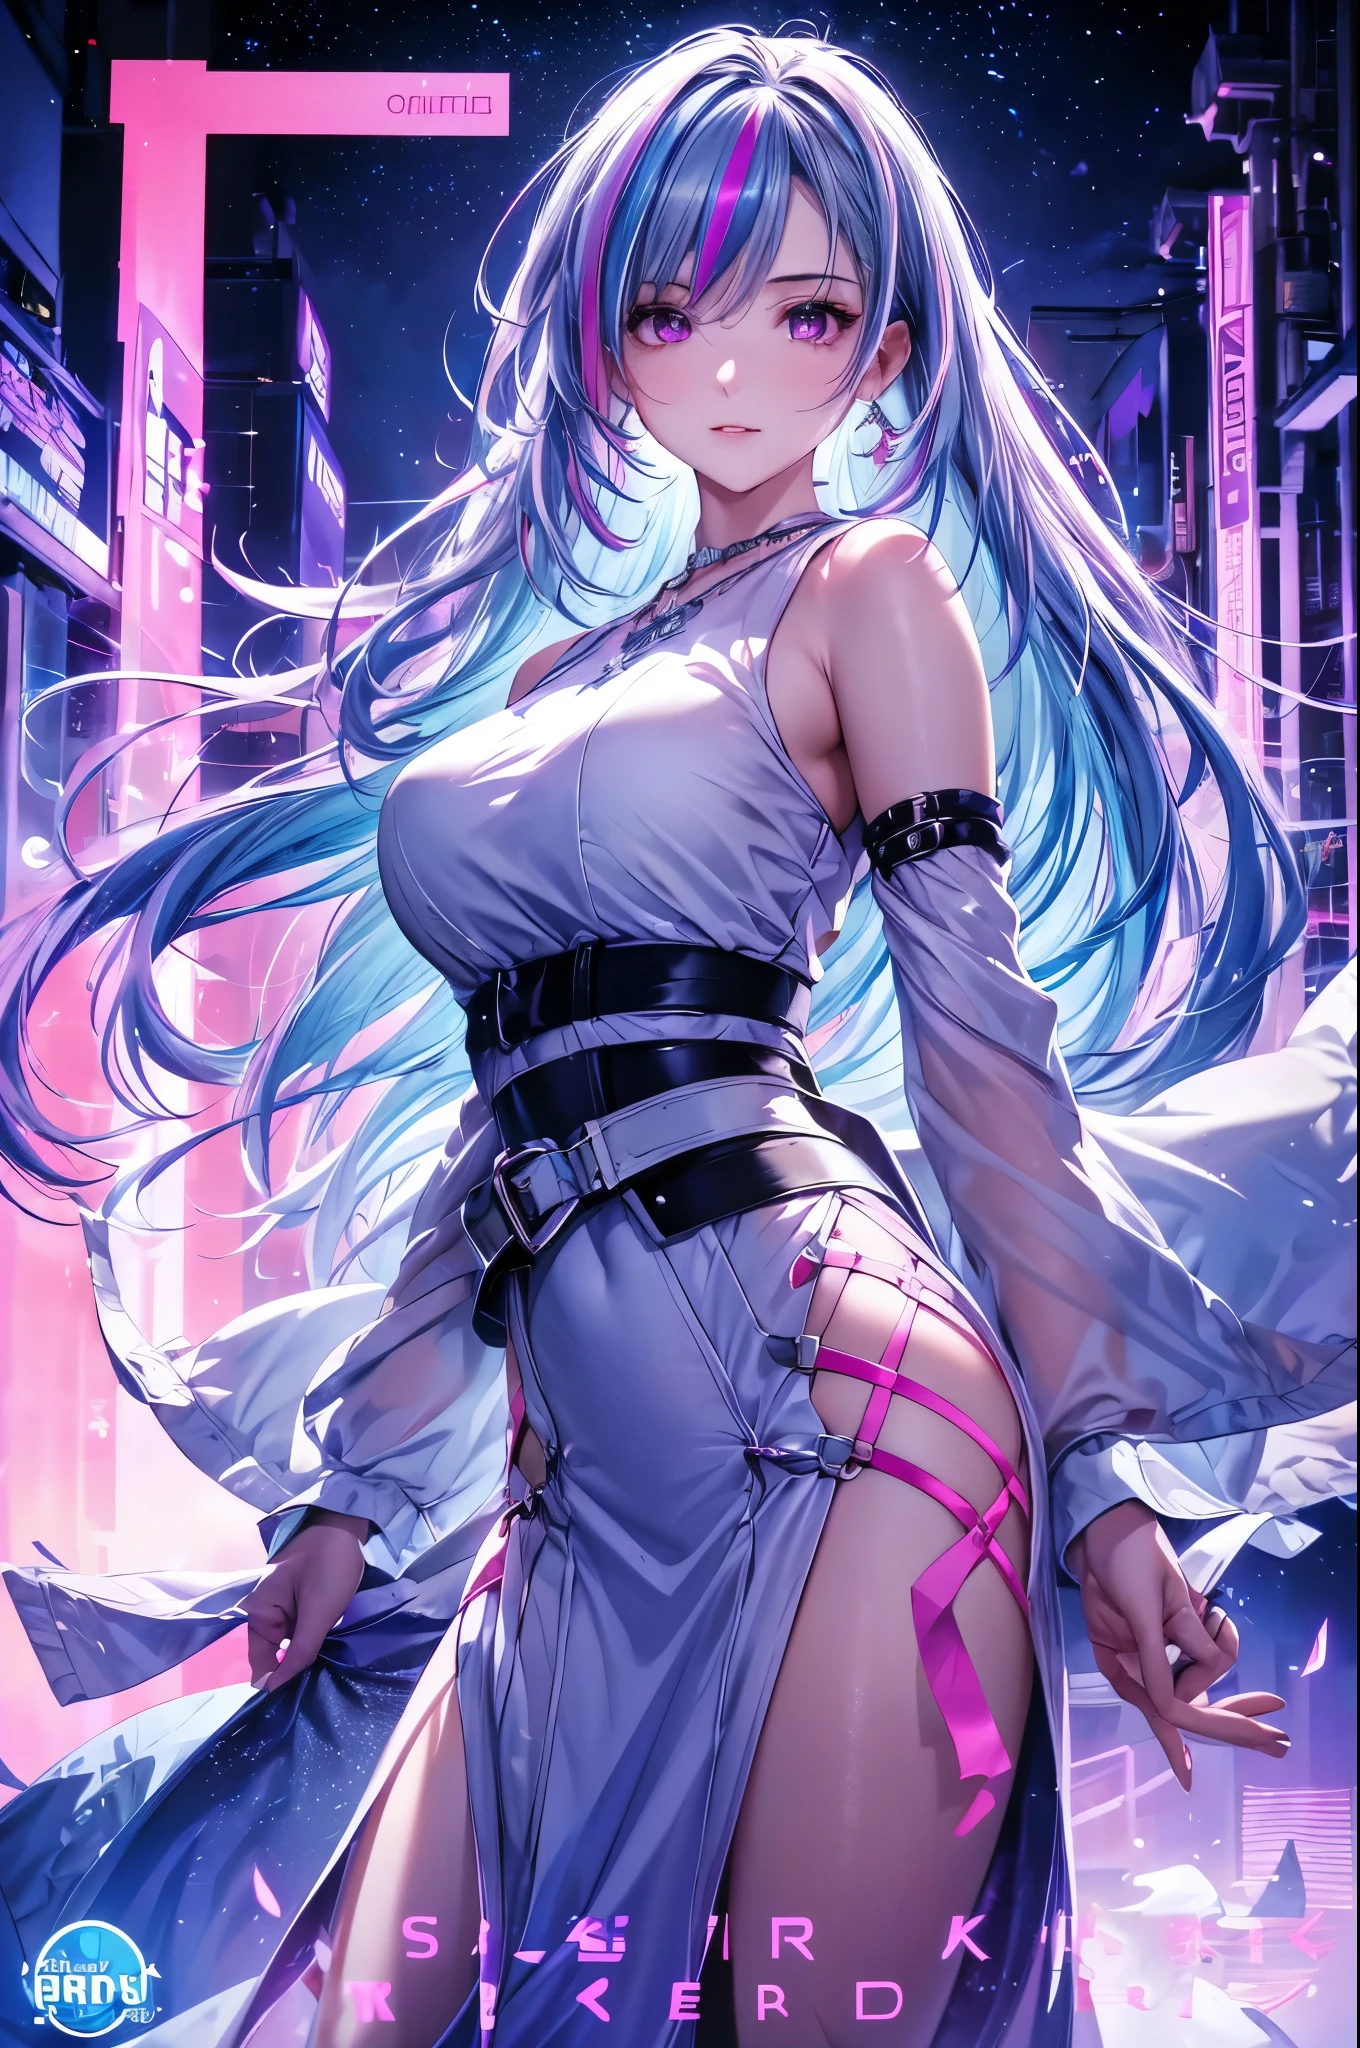 1 girl, 20 year old girl, one person, (Silver blue hair streaked pink purple:1.4), (Gradient sky blue hair ends:1.6), hair strand, absurdly long hair, single sidelock, wavy hair, shiny hair, floating hair, (Illusion deep purple eyes), delicate eyes, aqua eyes, super high detailed eyes, long upper eyelashes, ((glowing eyes)), makeup, Focus on face, Very detailed facial, Pretty Face, Perfect breasts, hot body, (Delicate skin texture:1.2), break, White extra long skirt, Fashion Clothing, necklace, Technical clothing masterpiece, on the street, looking at the starry night sky, meteor, cyberpunk, detailed background, perfect layer cut, clean focus, (magazine:1.3), (cover-style:1.3), Octane Render, Tyndall effect, lifelike, Dark Studio, Side light, Two-color lighting, realism, chiaroscuro, (glowing light), sparkle, ray tracing, cinematic lighting, Futurism, motion blur, atmospheric perspective, Depth of Field, Bokeh, best quality, UHD, super detail, masterpiece, highres, ccurate, retina, anatomically correct